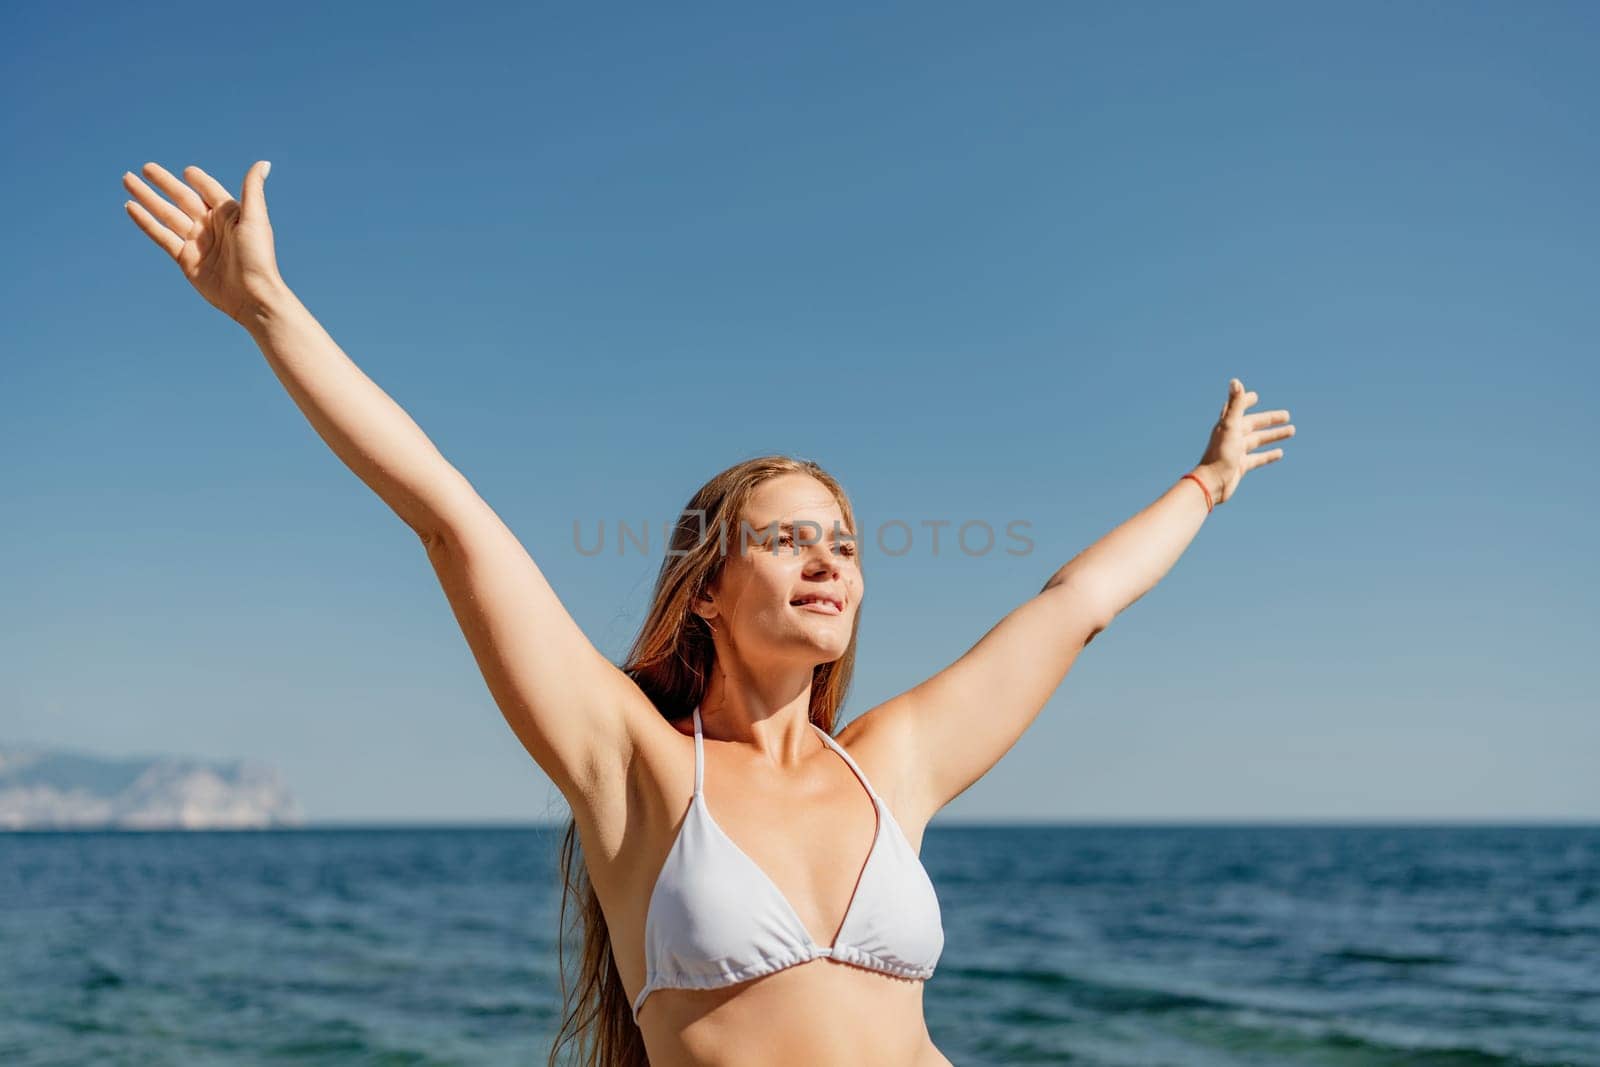 A woman in a bikini is standing on the beach and is smiling. She is reaching out with her arms open, as if she is embracing the ocean. Concept of joy and relaxation